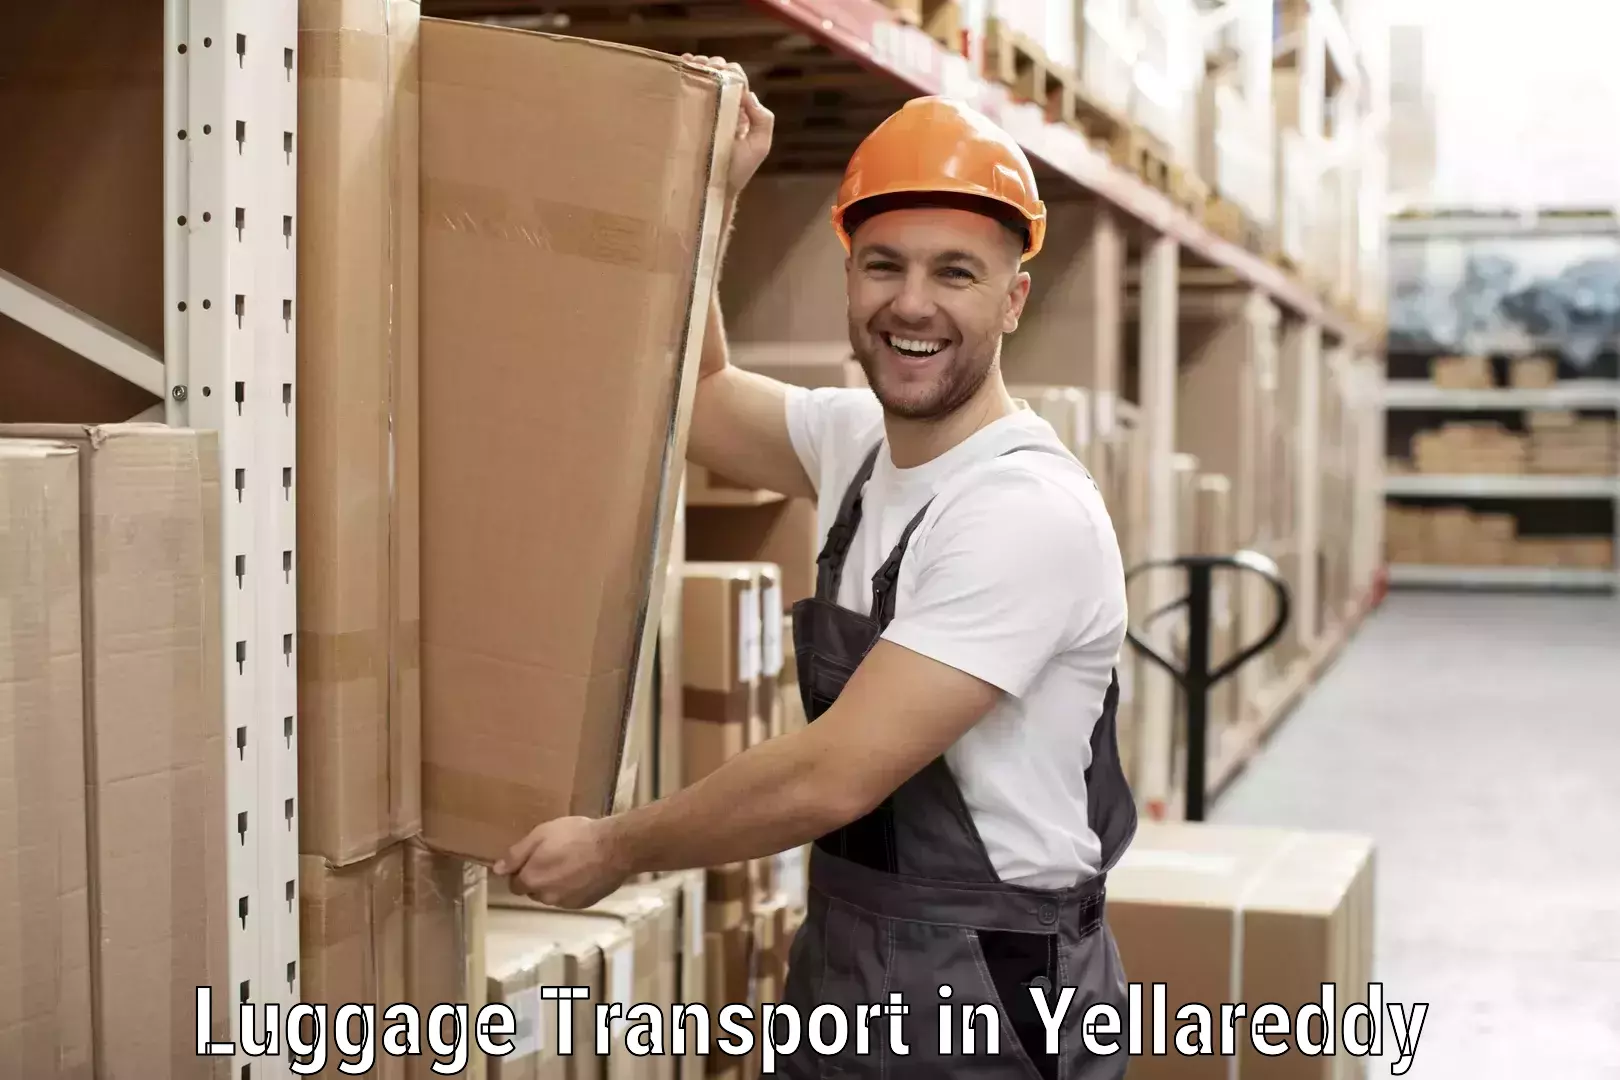 Luggage storage and delivery in Yellareddy